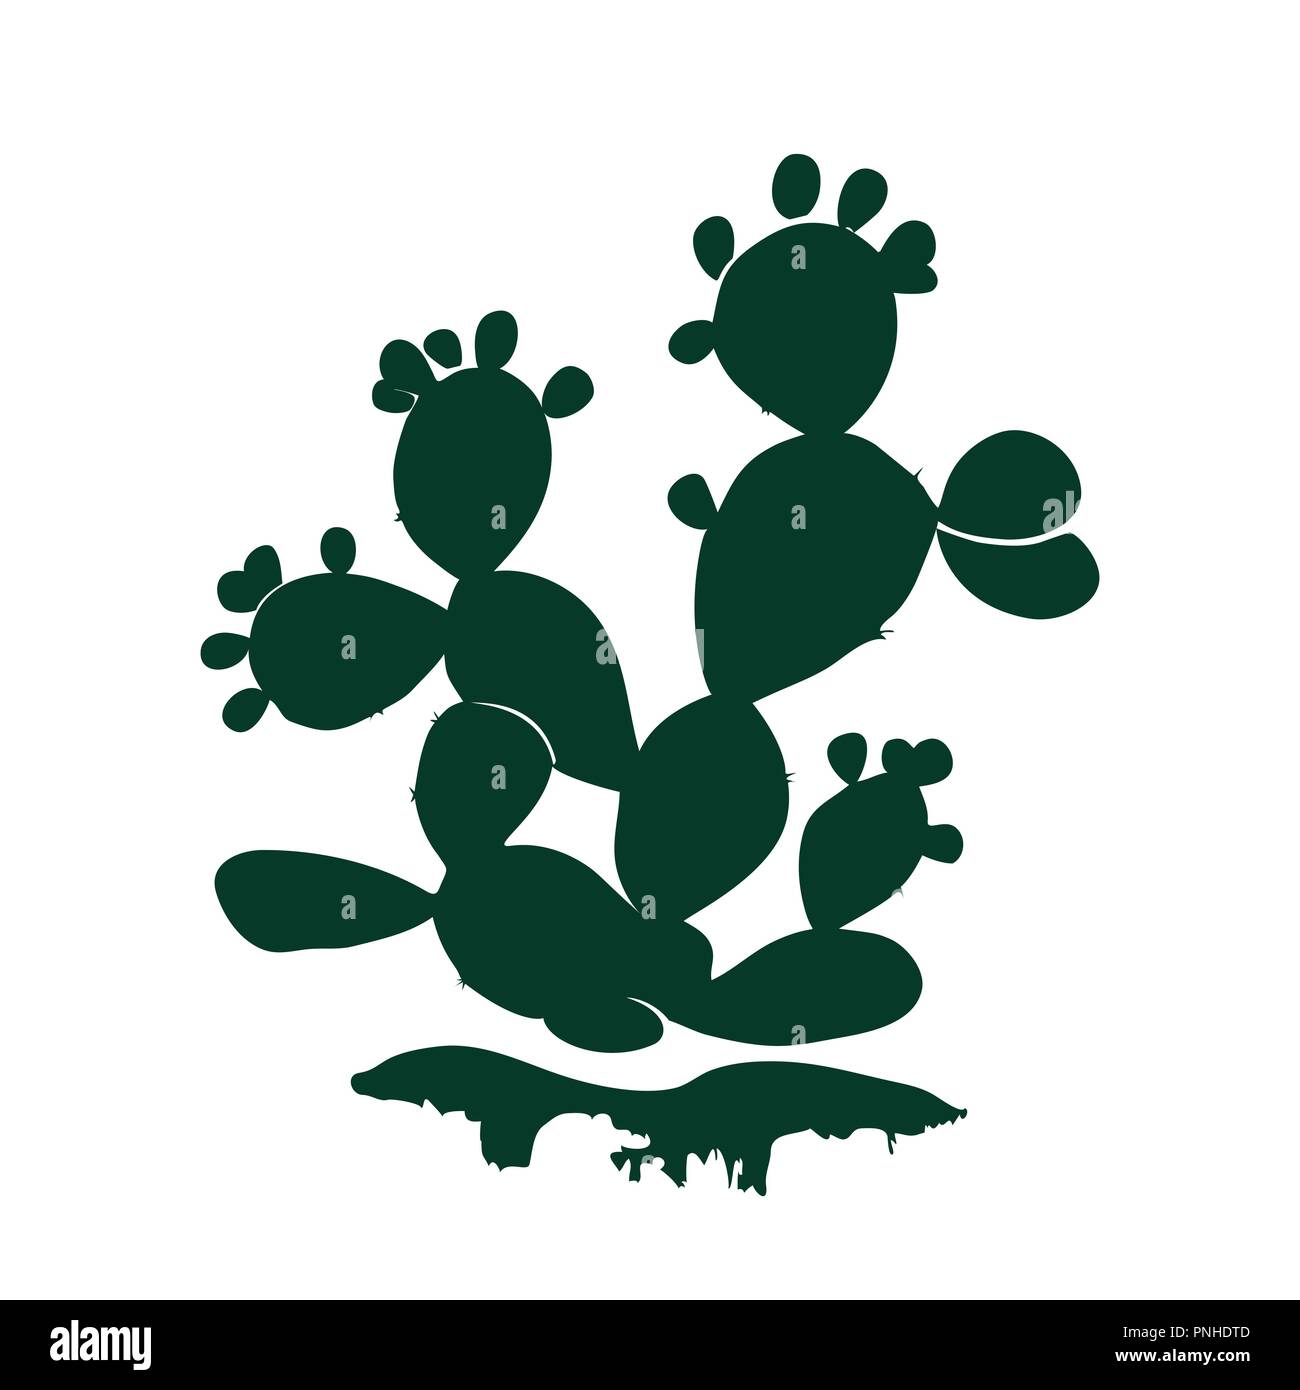 Prickly pear cactus icon isolated on white background. Opuntia, ficus indica silhouette with ripe fruits. Mexico country symbol, vector illustration. Stock Vector